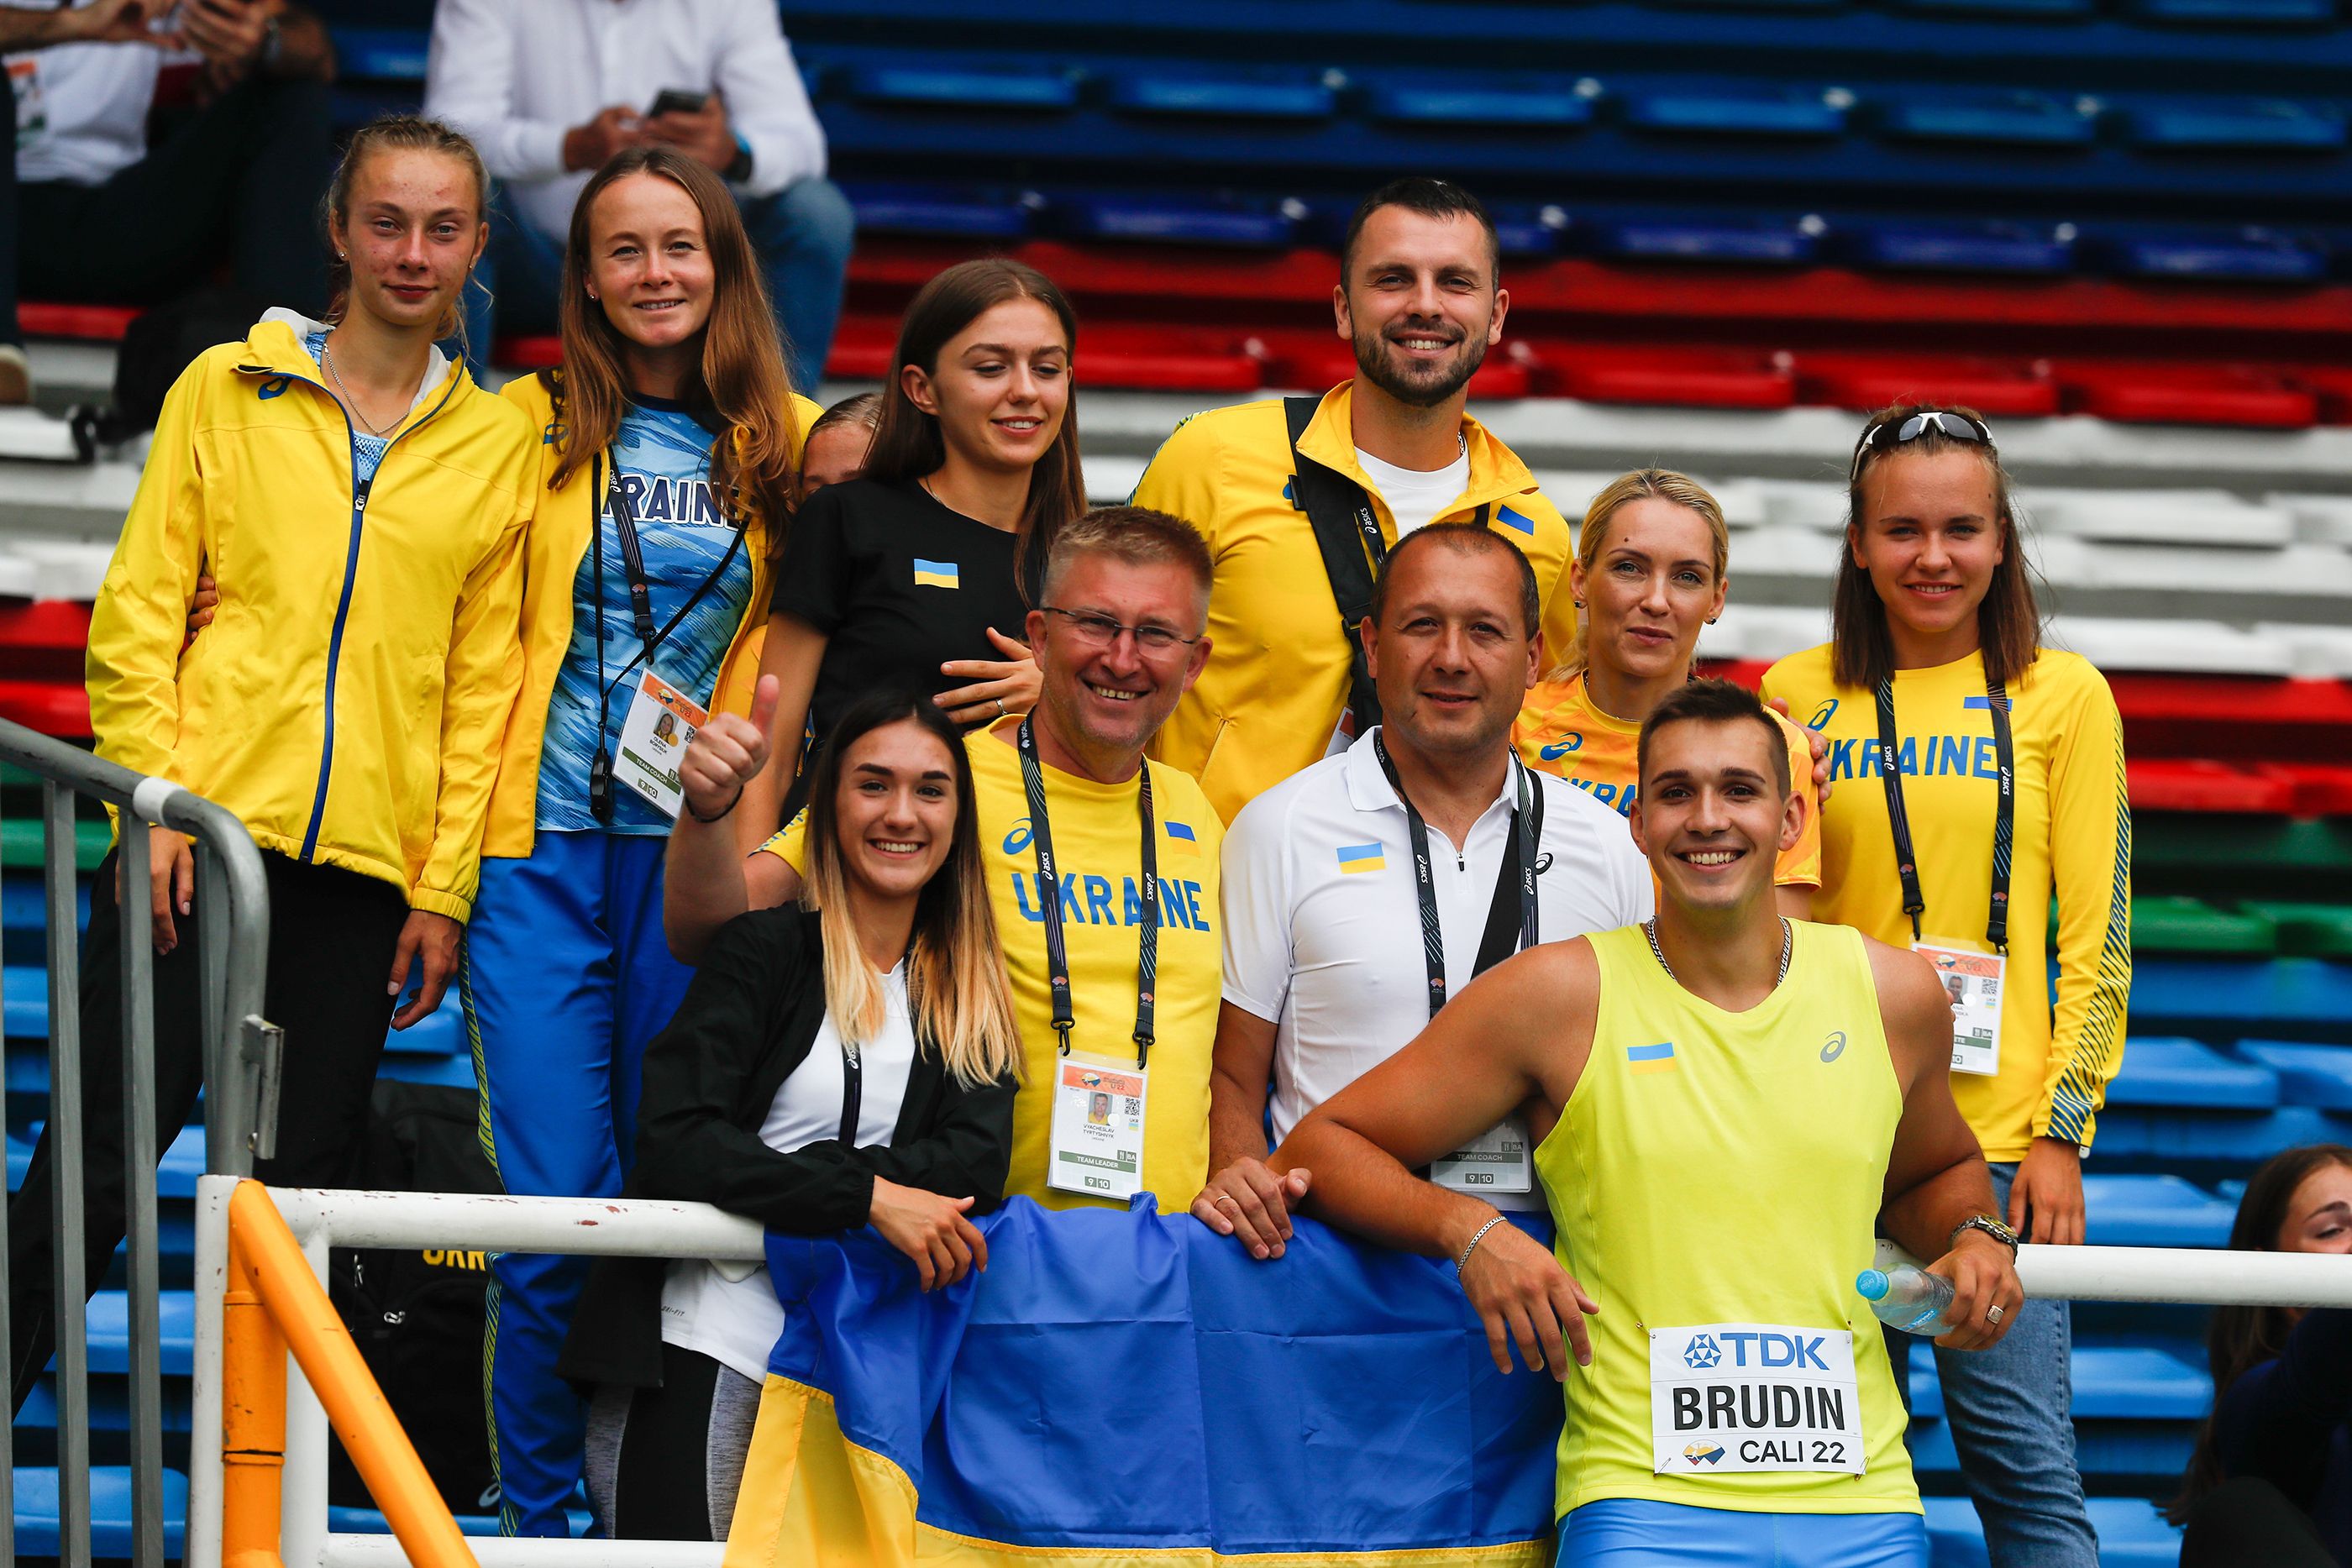 Mykhailo Brudin celebrates his qualification for the discus final with some of the Ukraine team